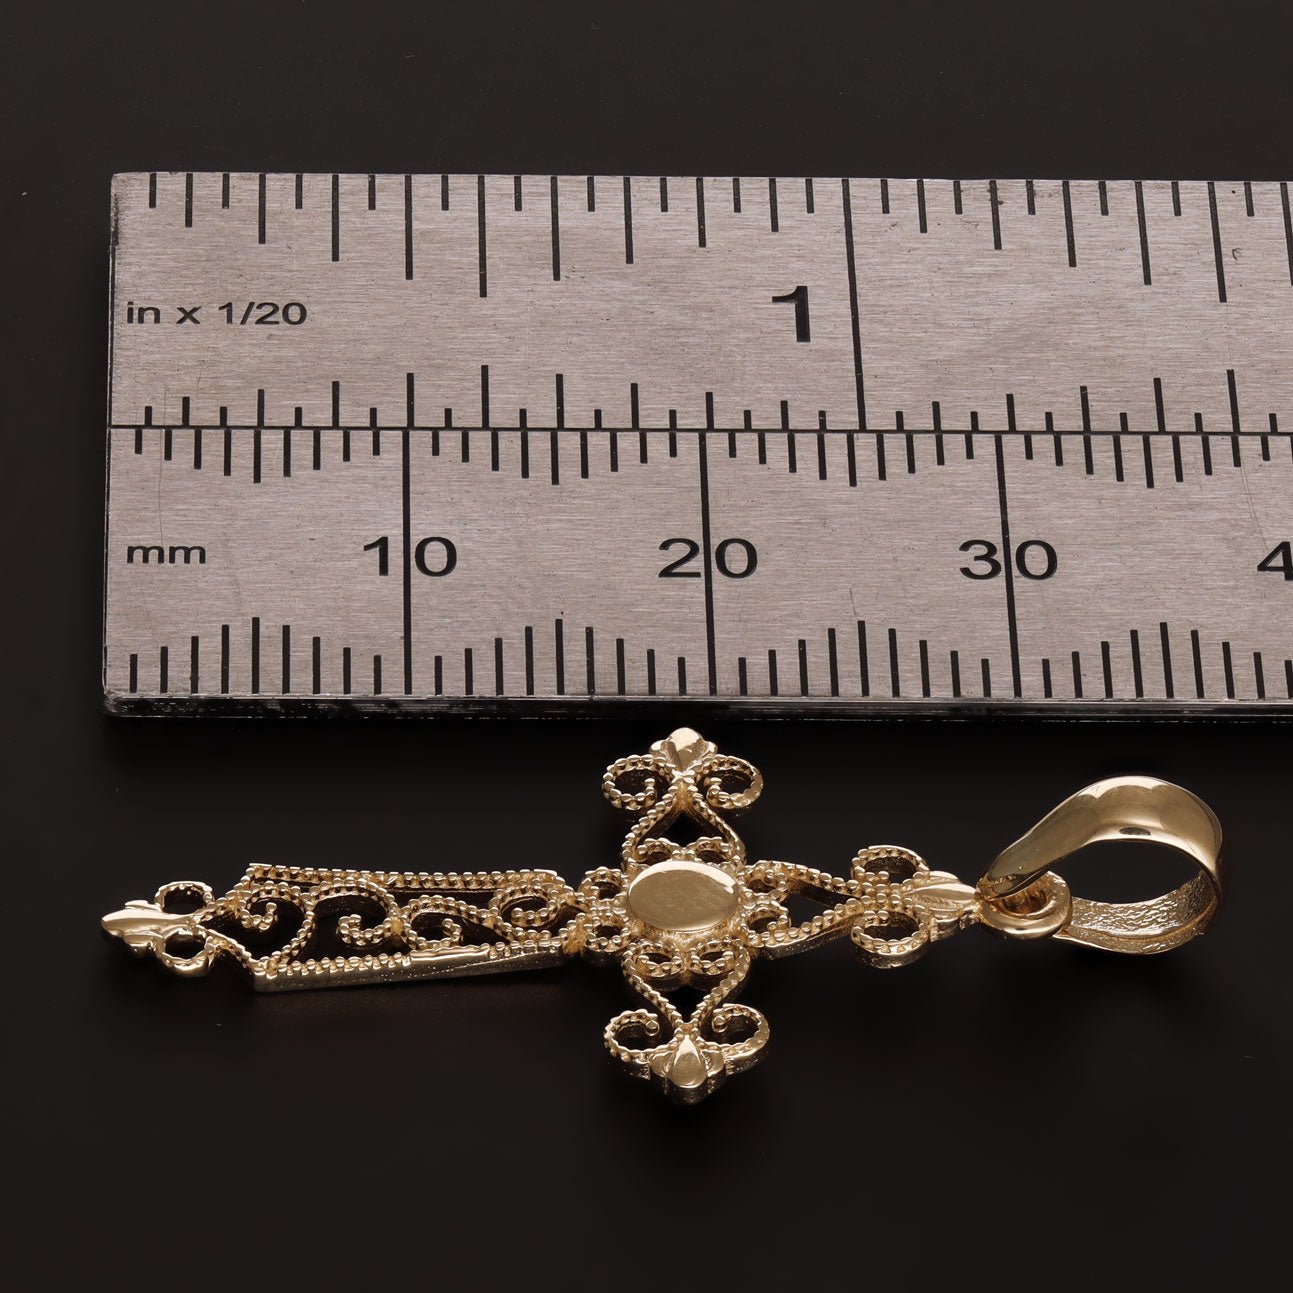 14ct Y Gold Unique Patterned Cross Pendant - 37mm - FJewellery